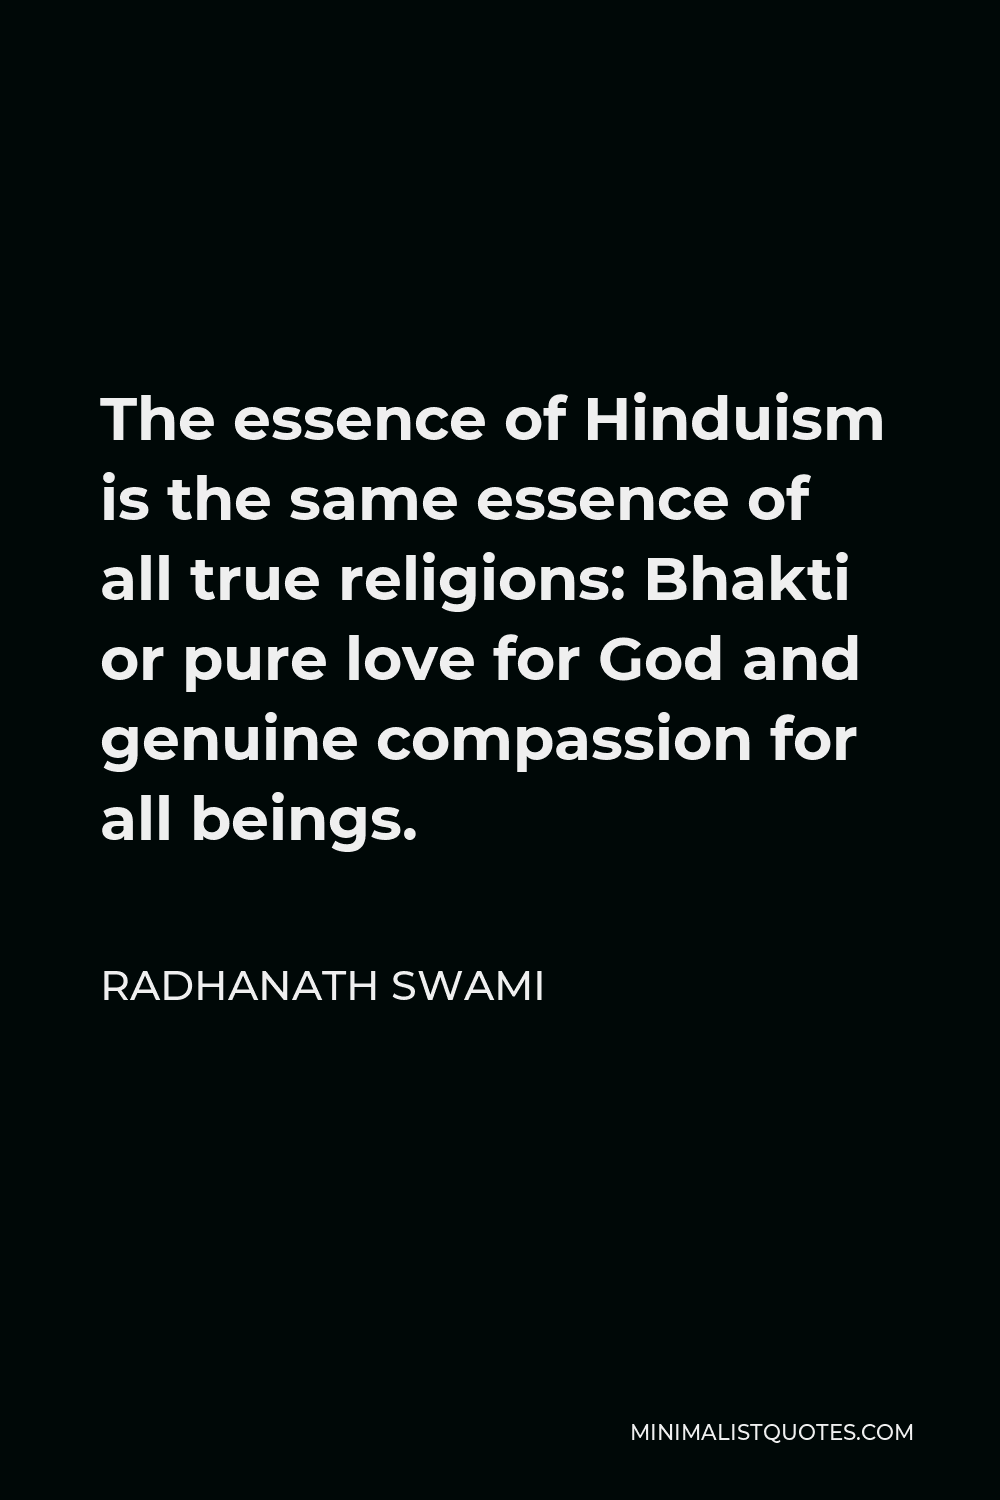 Radhanath Swami Quote - The essence of Hinduism is the same essence of all true religions: Bhakti or pure love for God and genuine compassion for all beings.